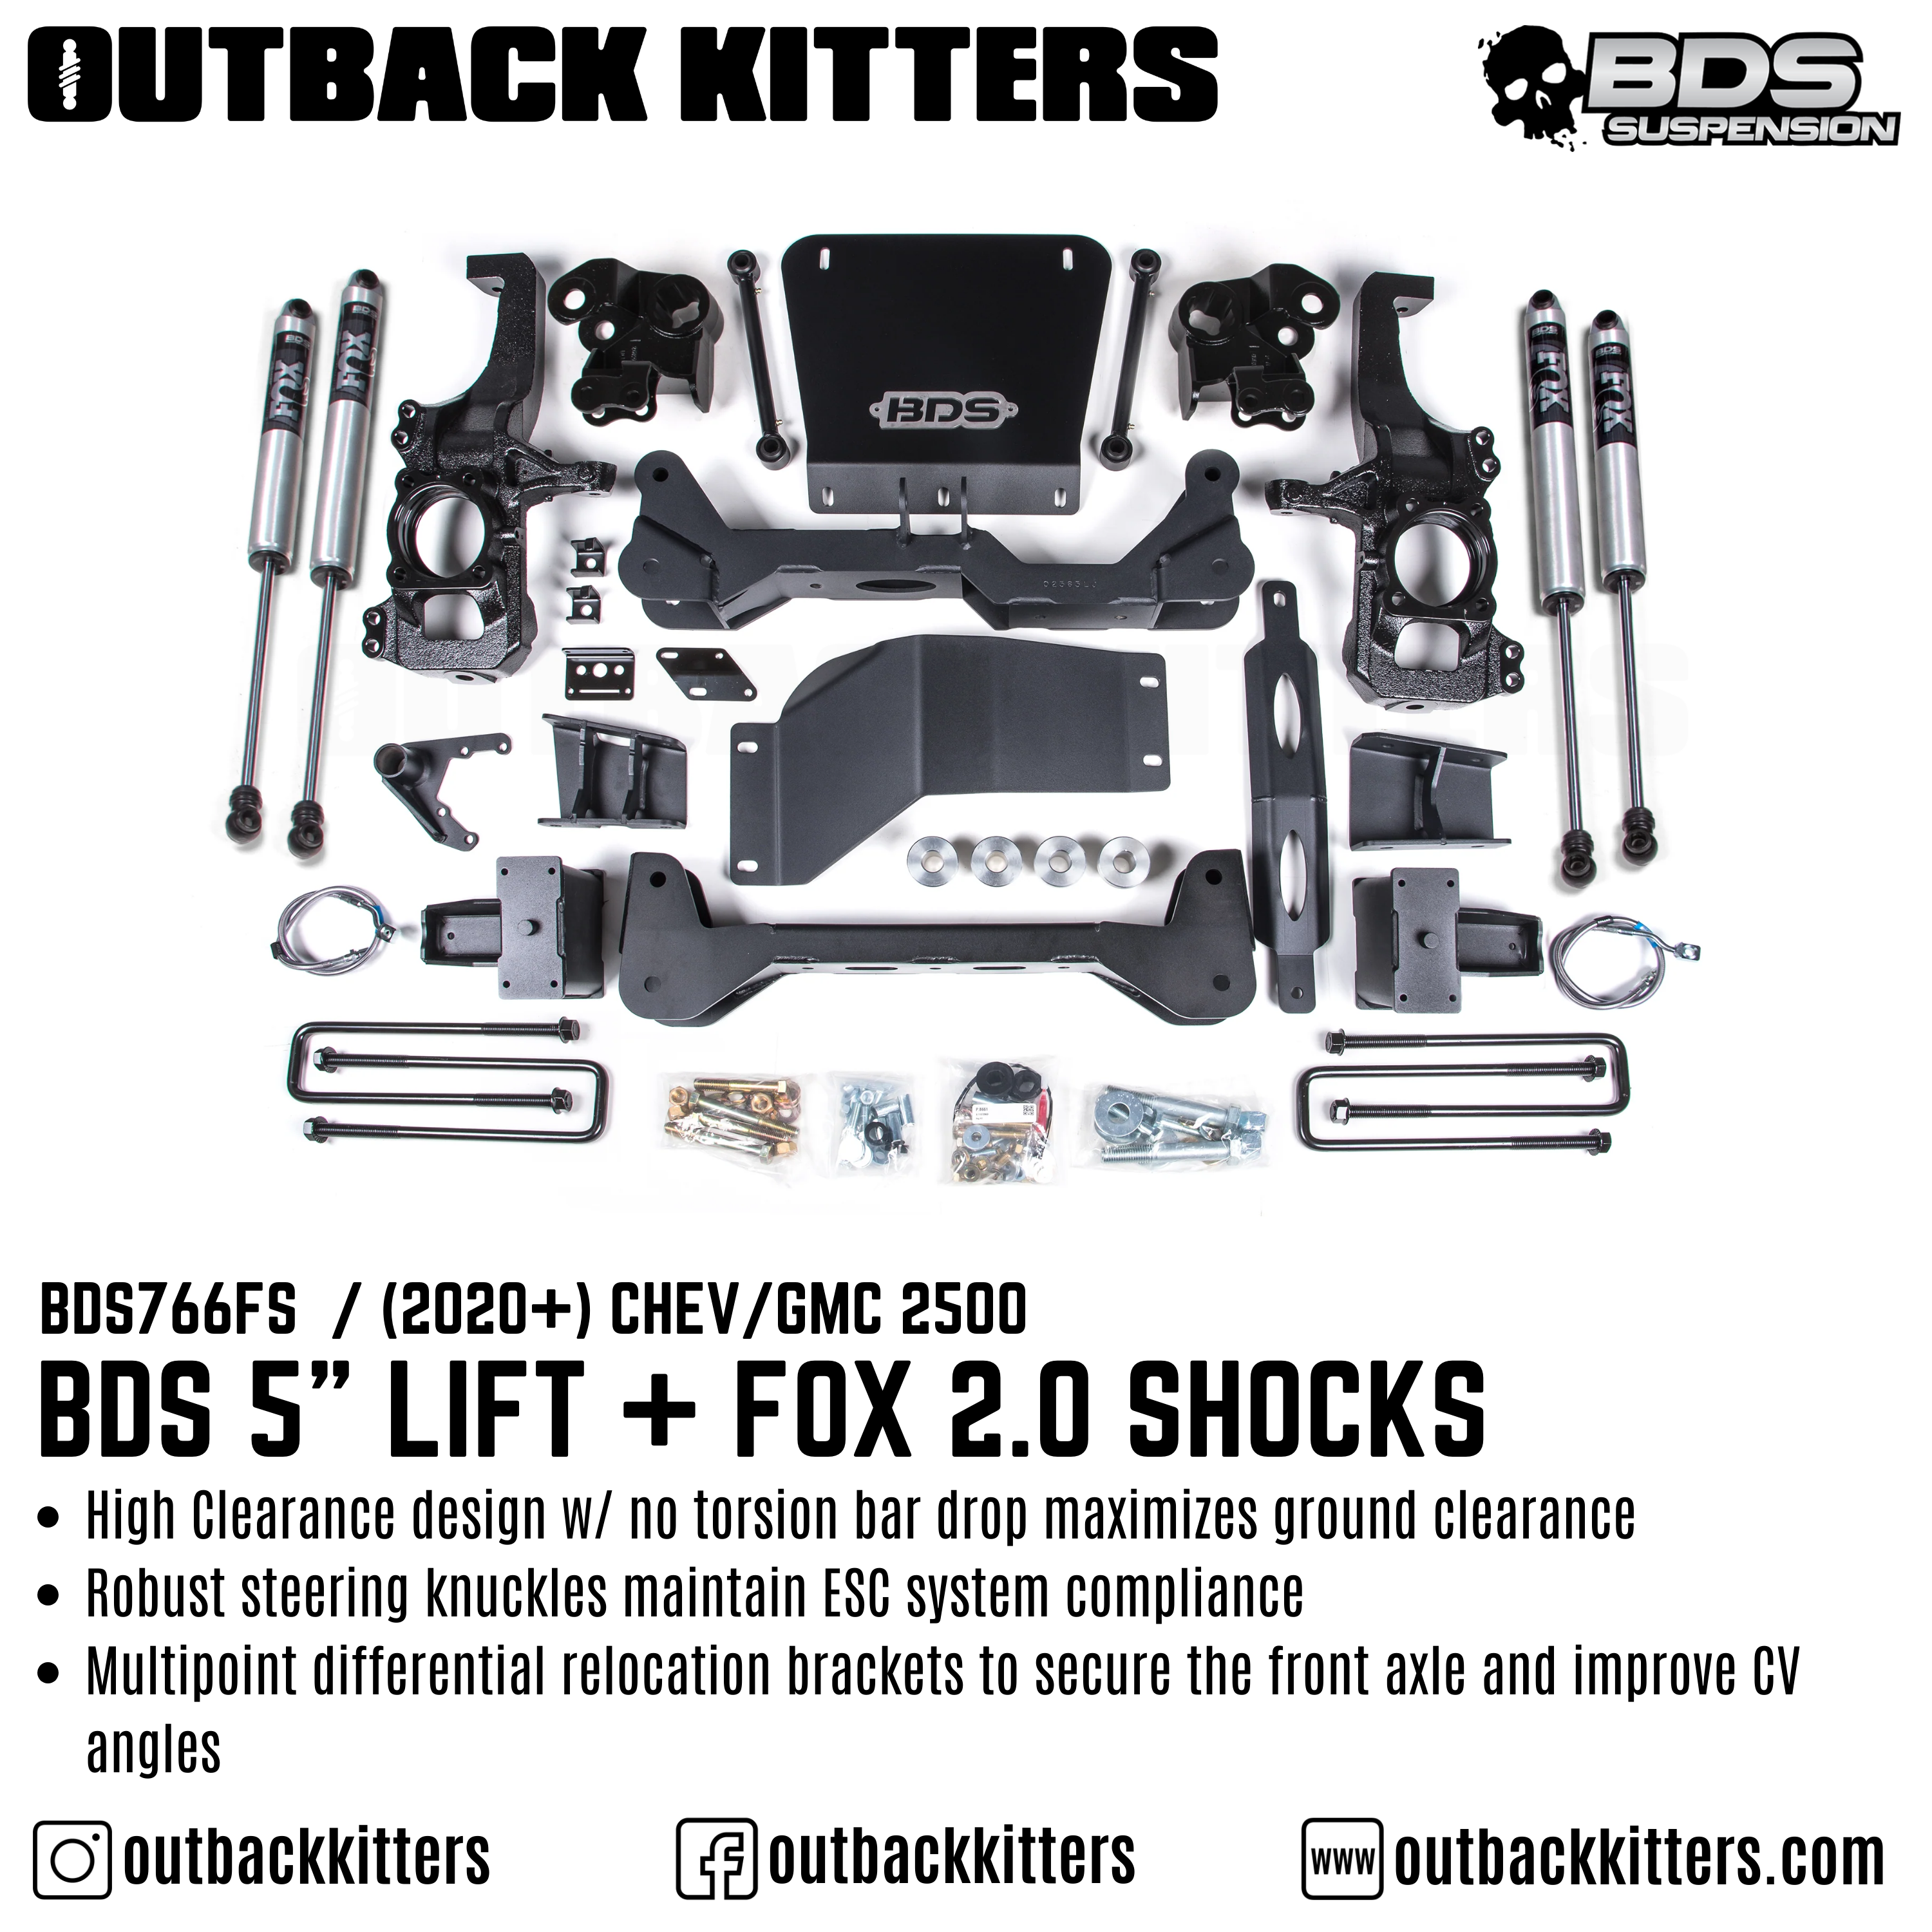 BDS Suspension 5" Lift Kit for 2020+ Chevy Silverado 2500 with Fox 2.5 Performance Elite Shocks - Outback Kitters